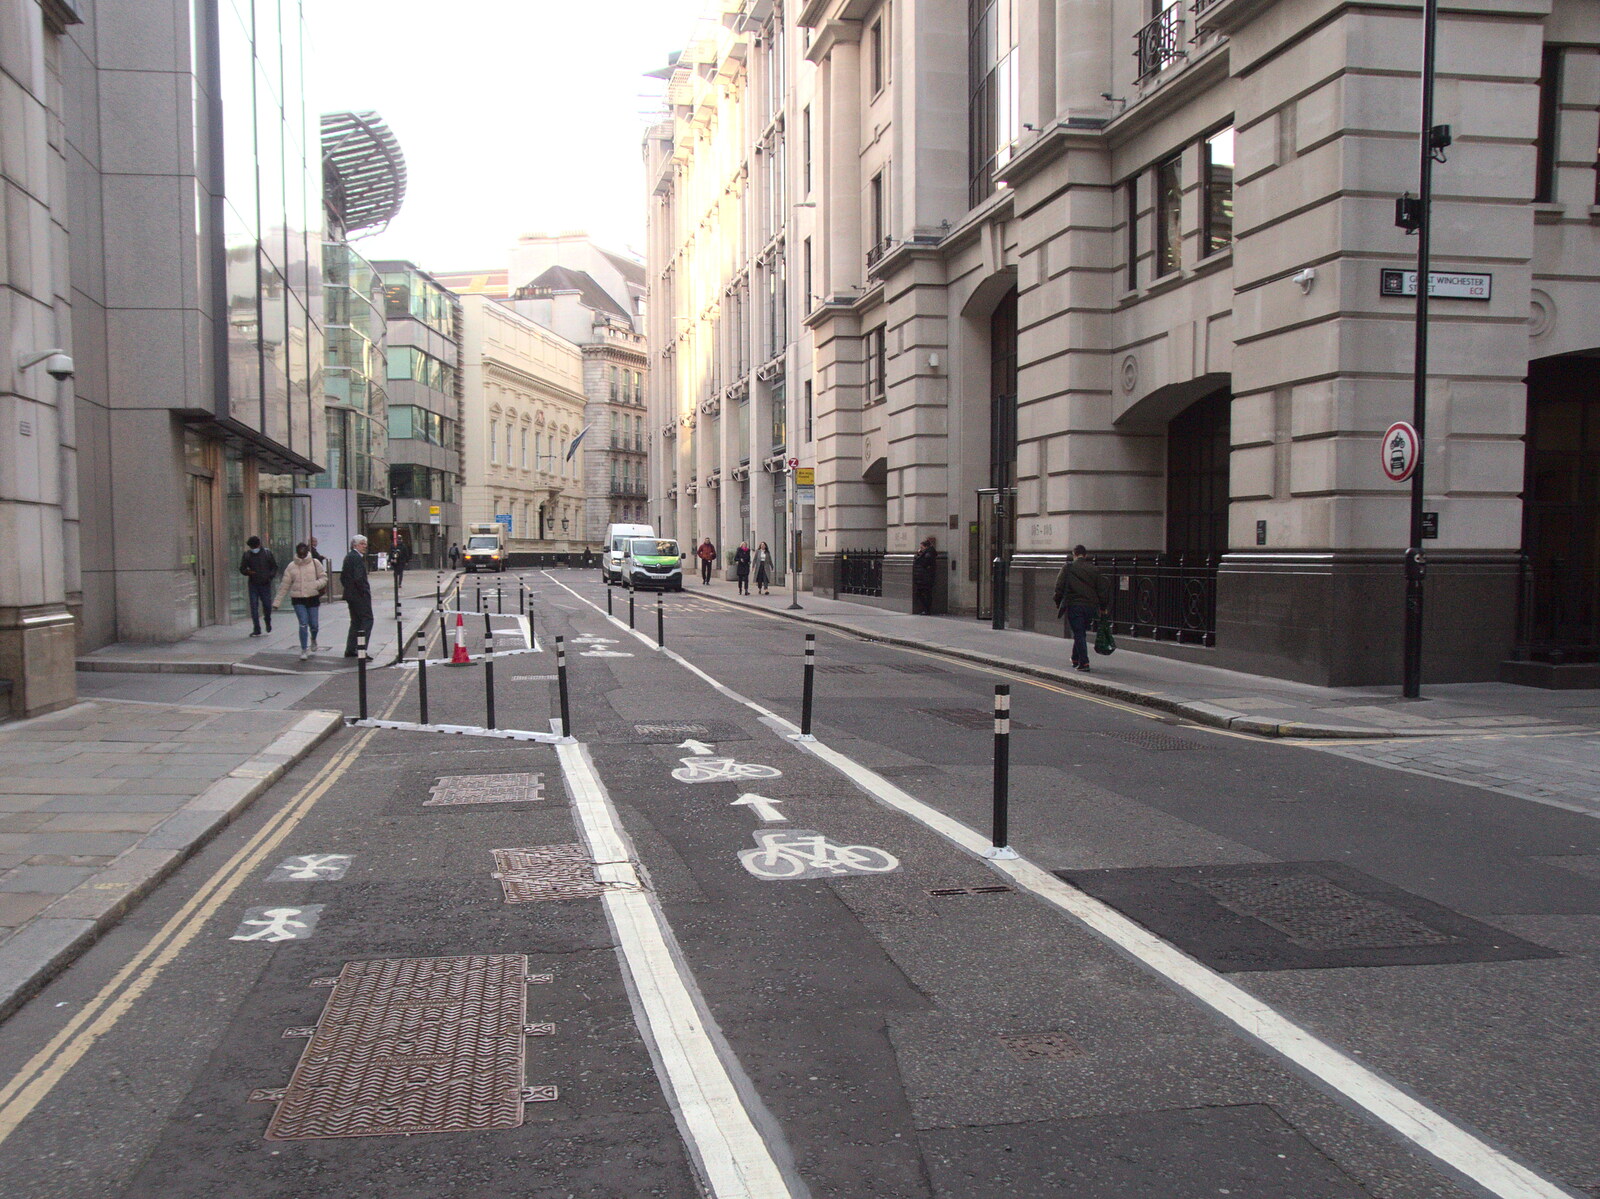 Old Broad Street has got some new bike lane thing from The Last Trip to the SwiftKey Office, Paddington, London - 23rd February 2022